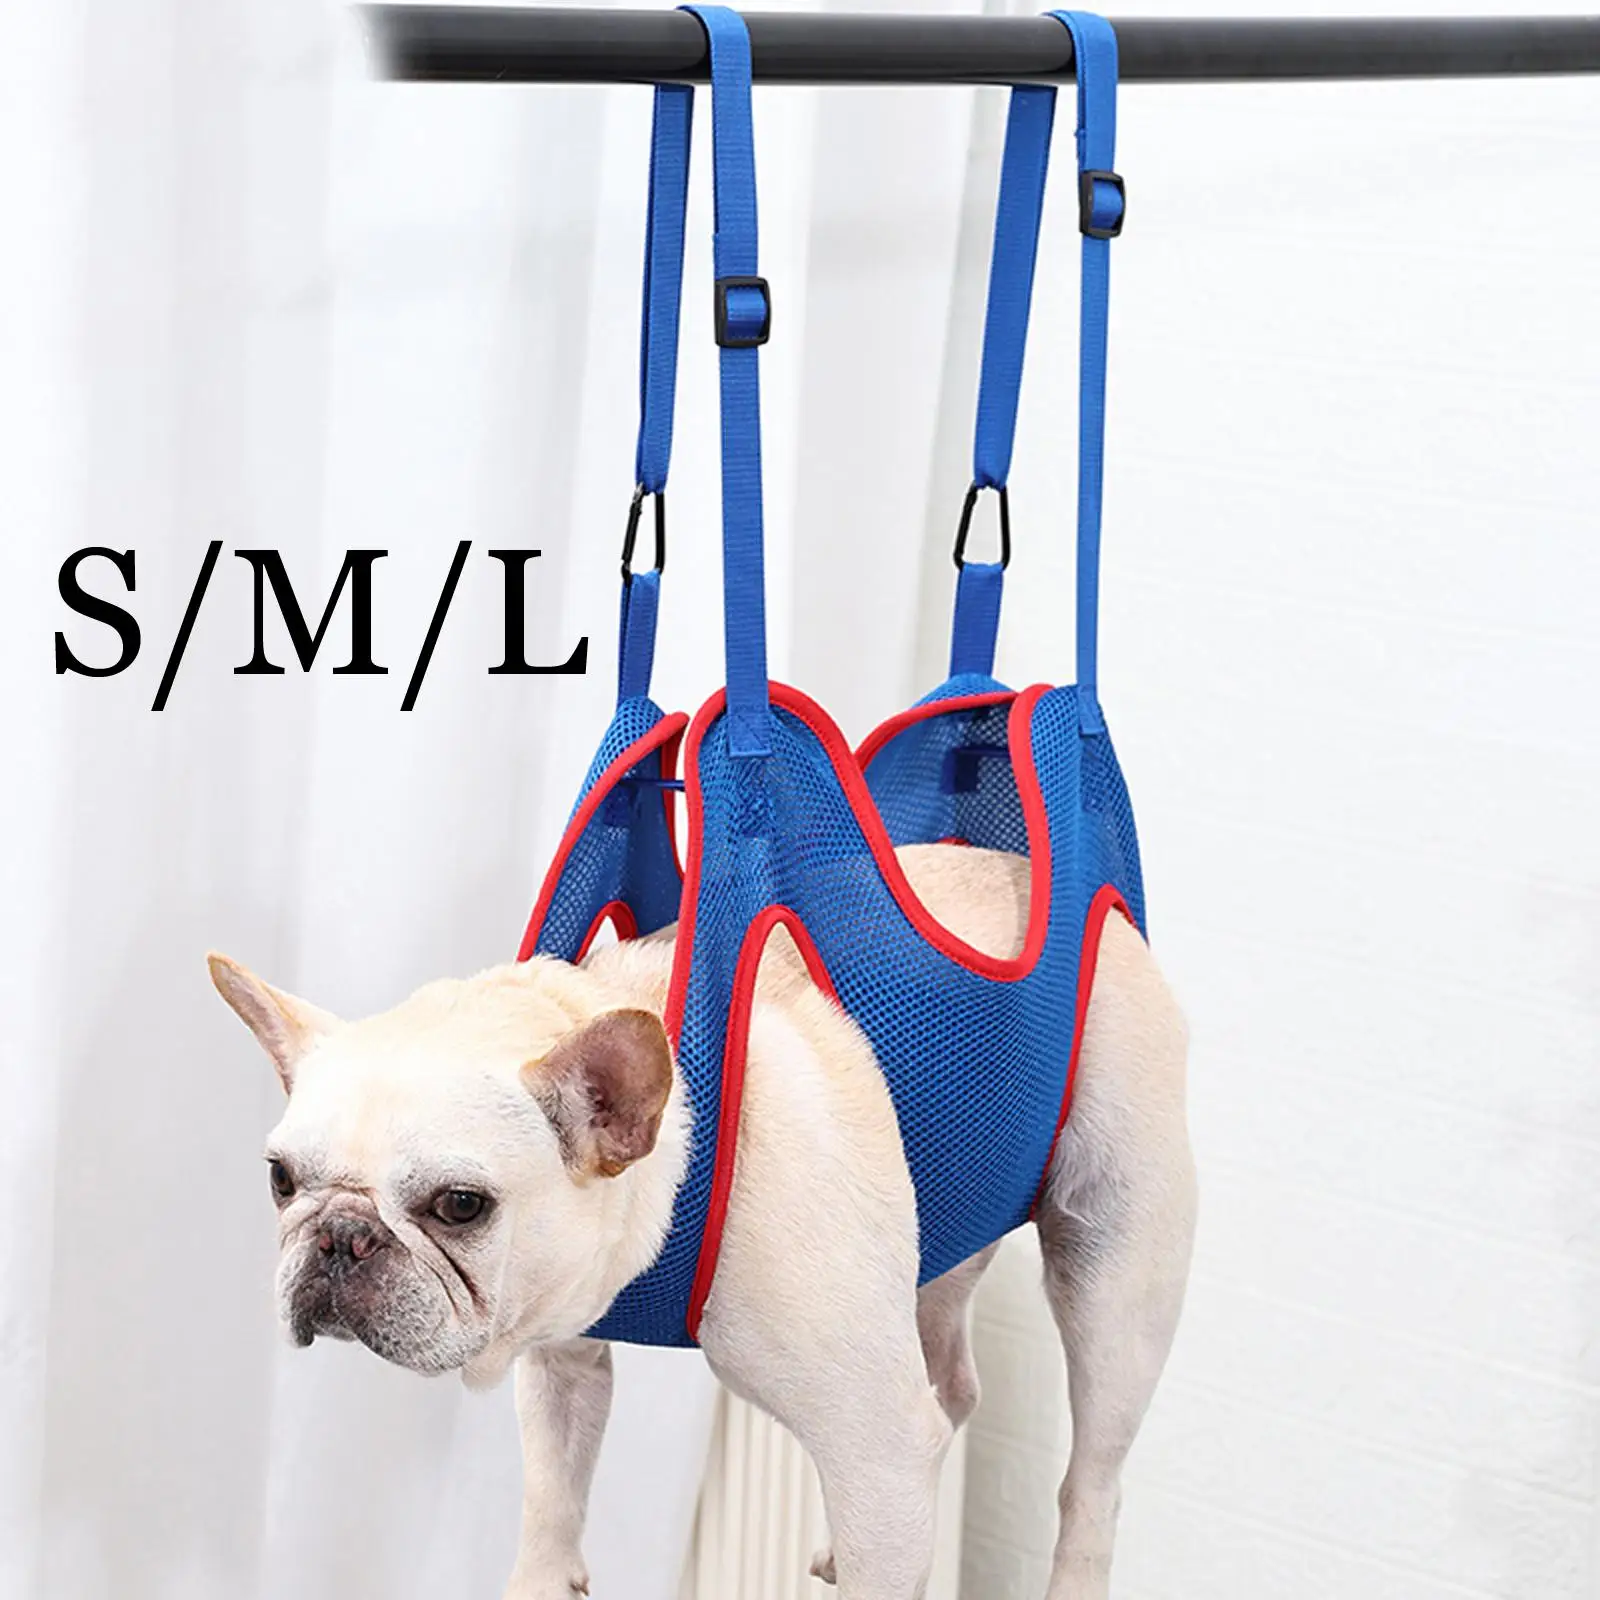 Portable Dogs Hanging Holder Hanger with 2 Hooks Dogs Grooming Sling for Bathing Nail Trimming Grooming Washing Claw Care